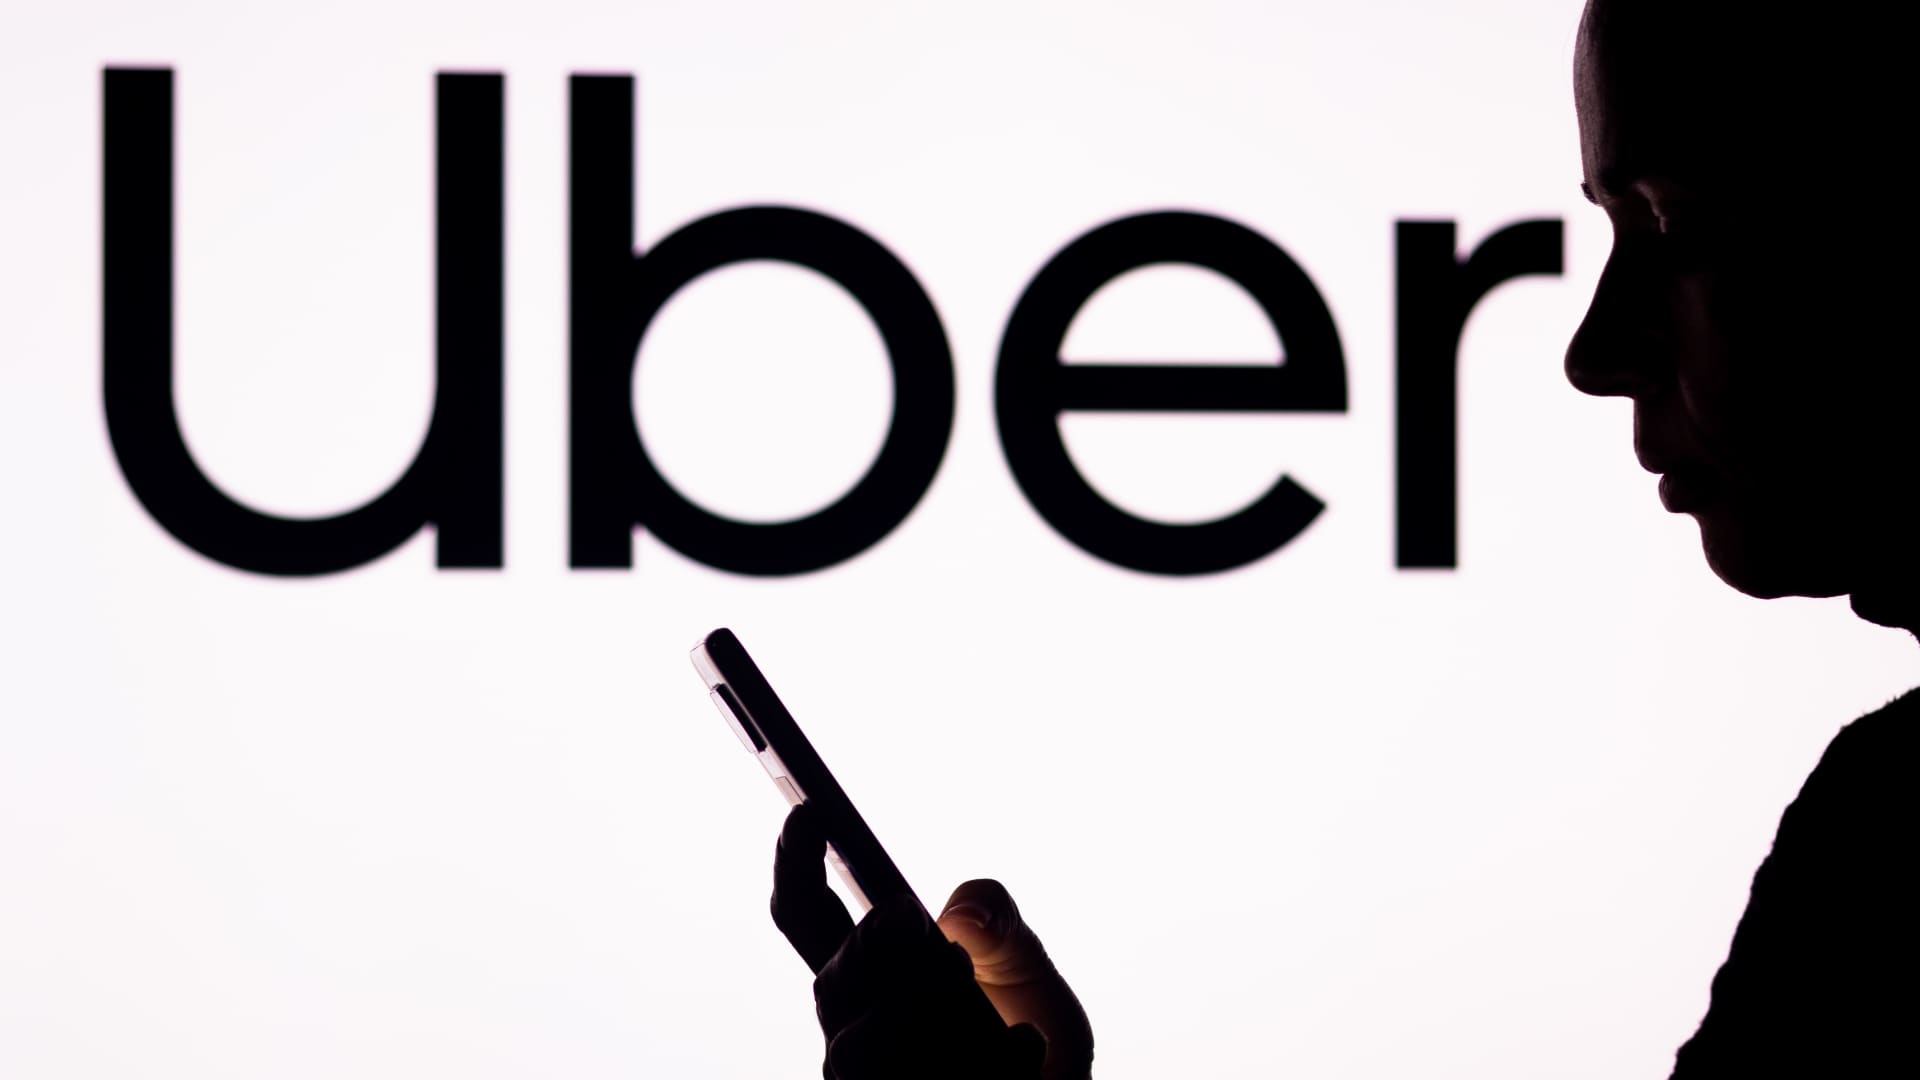 SoftBank sells entire stake in Uber as Vision Fund losses mount